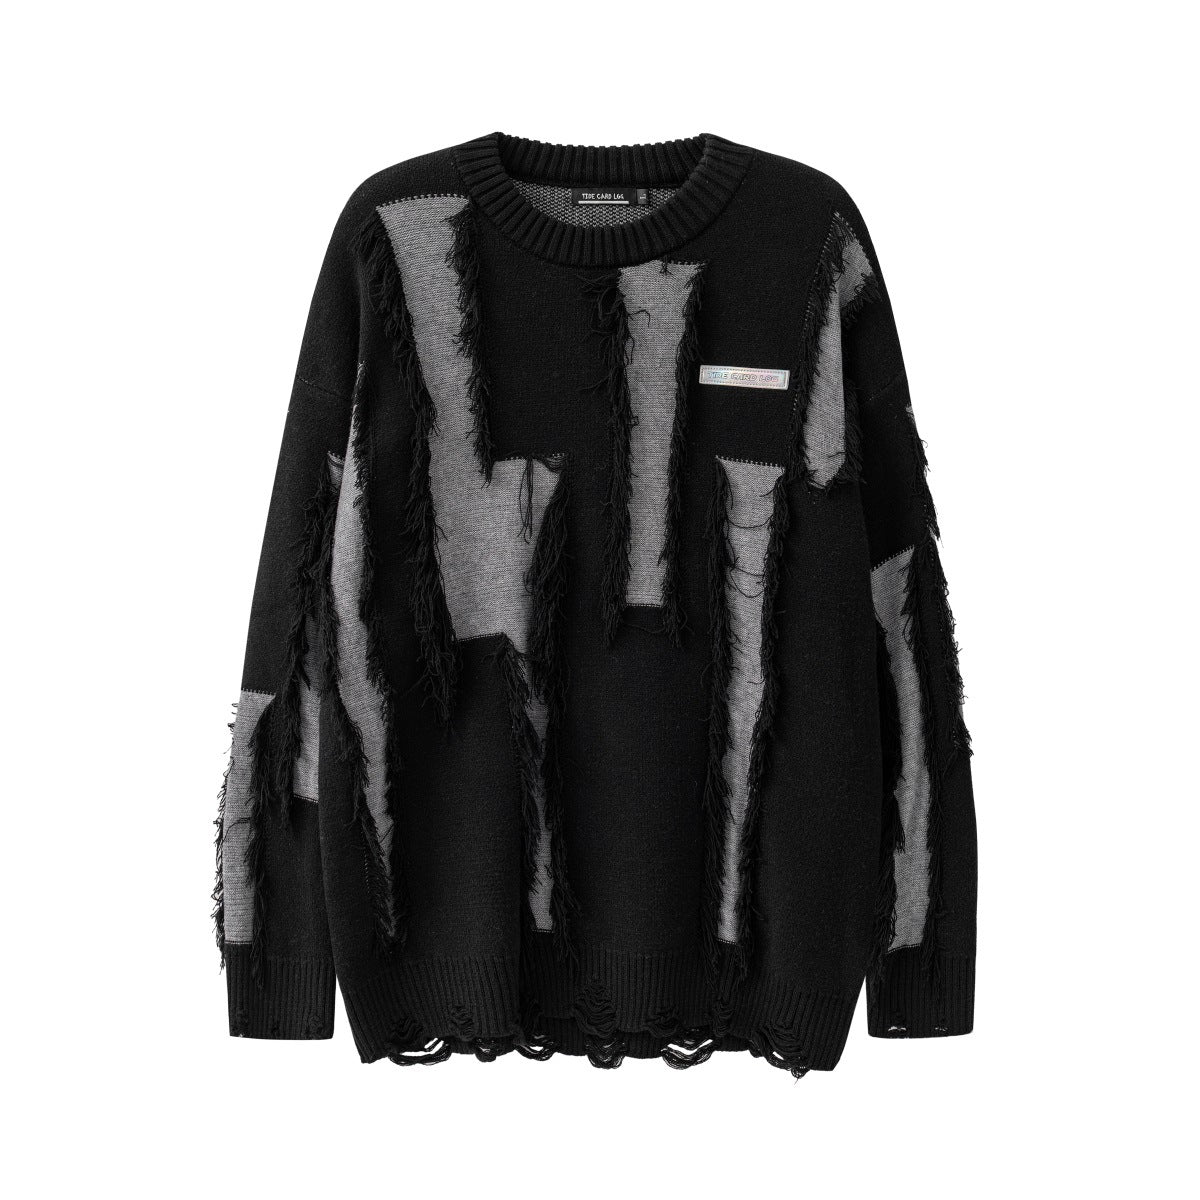 Unisex 2 Colors Fringed Contrast Sweater